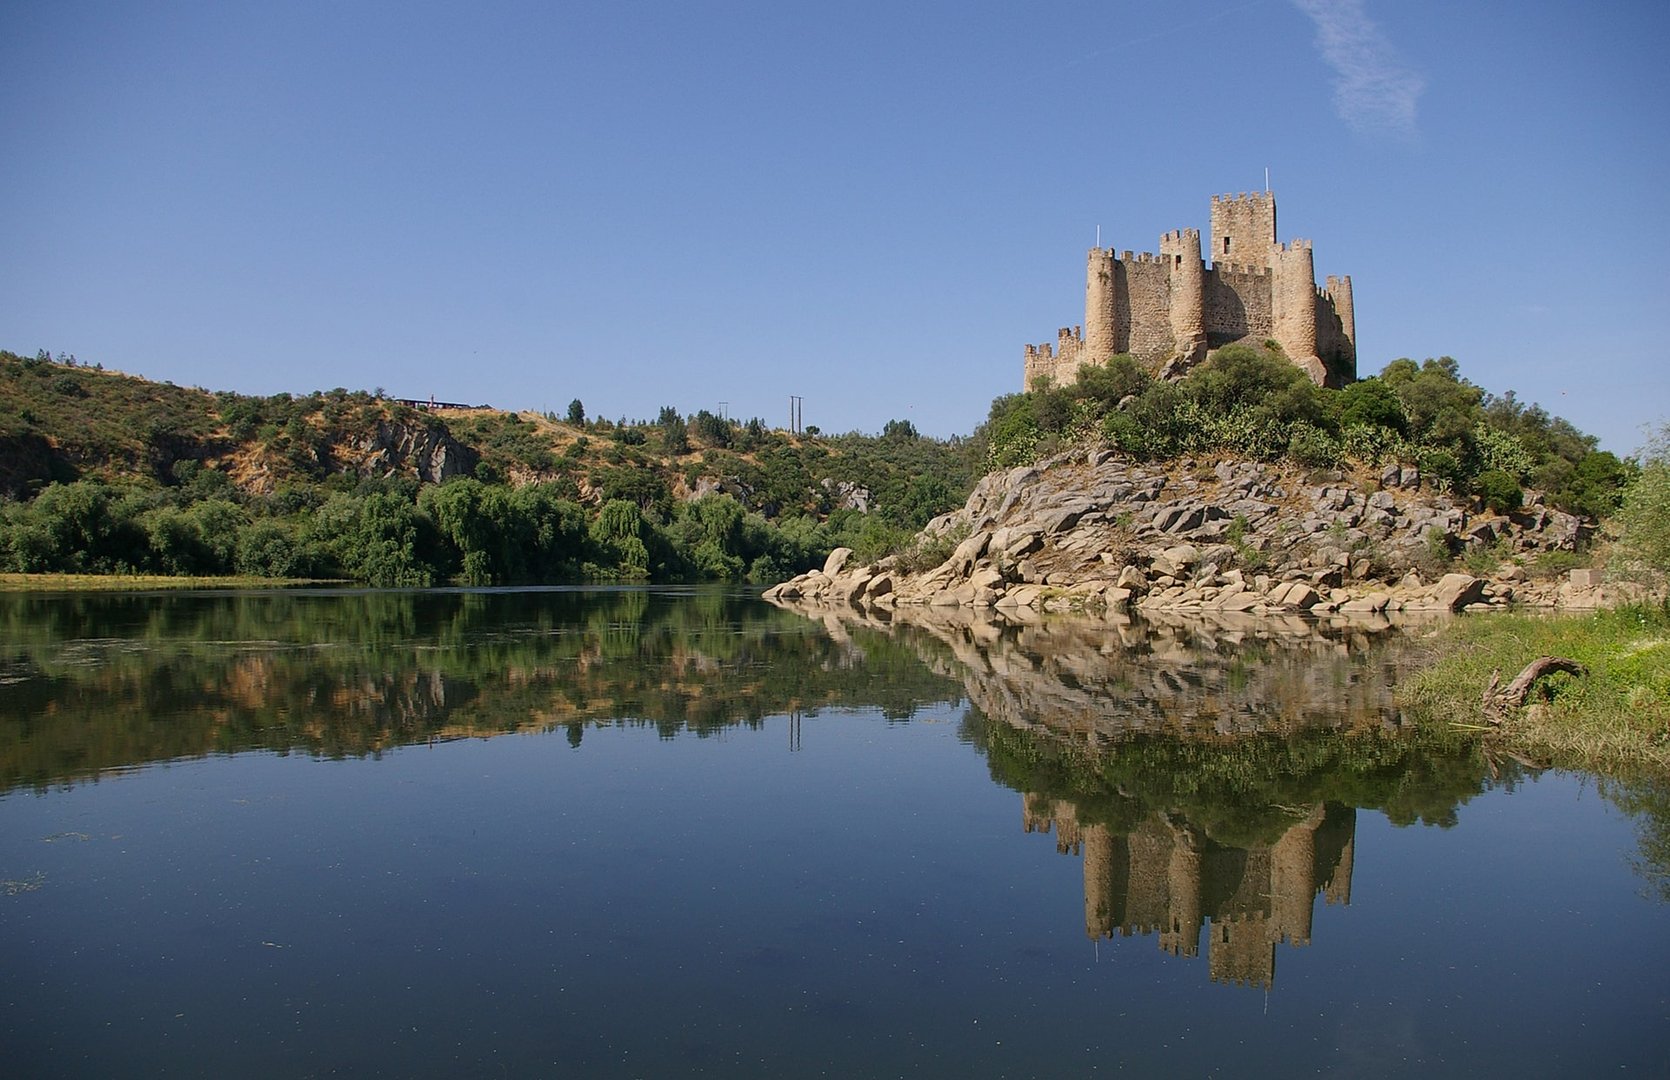 The Castle of Almourol was built in a setting of outstanding scenic beauty